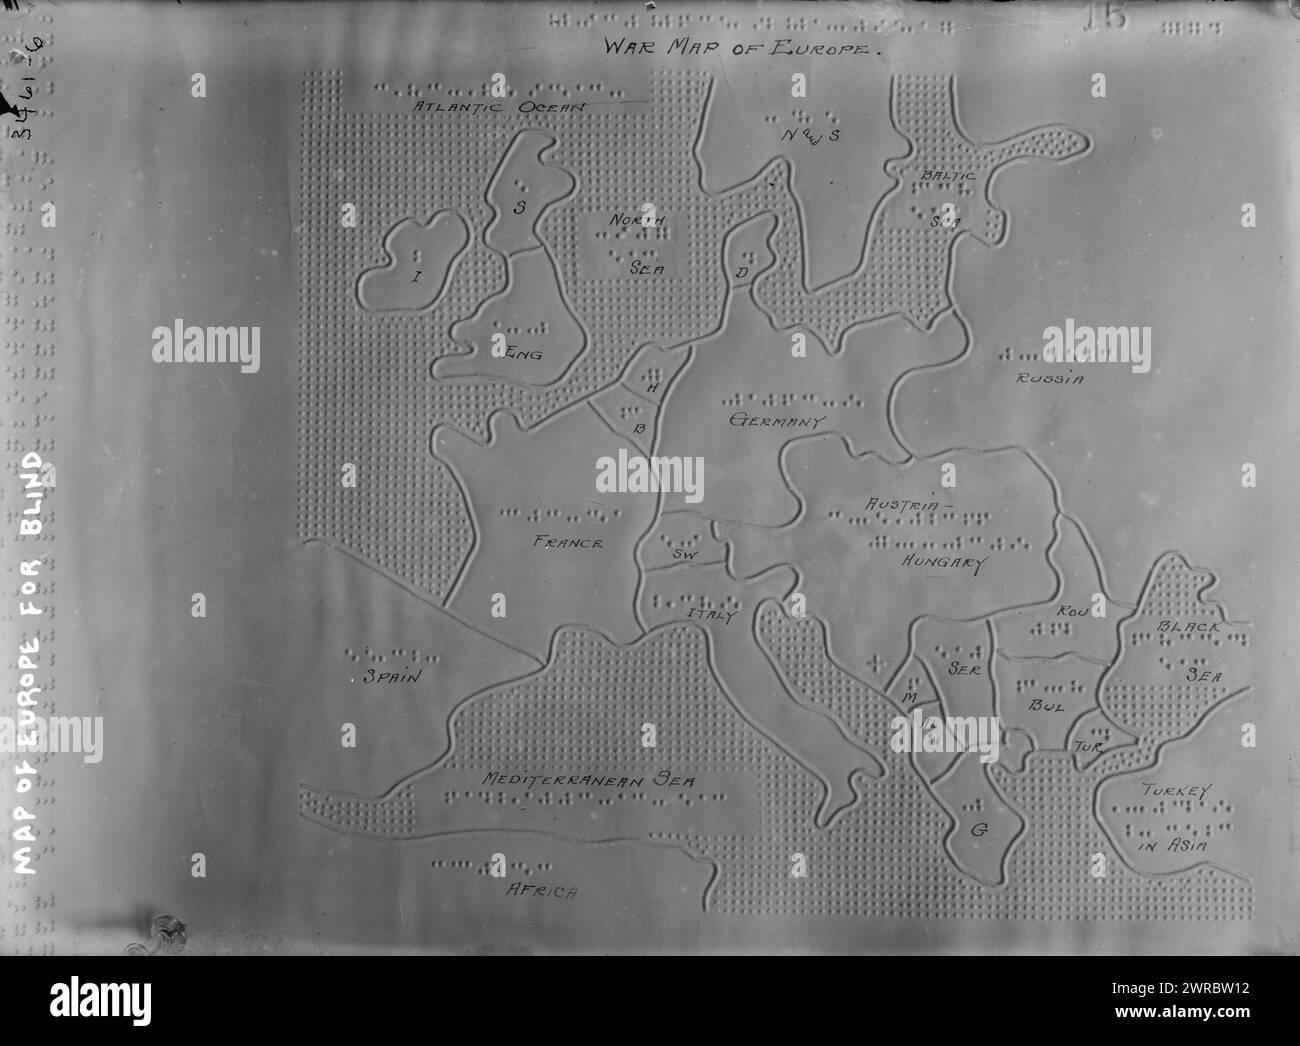 Map of Europe, for blind, between ca. 1910 and ca. 1915, Glass negatives, 1 negative: glass Stock Photo